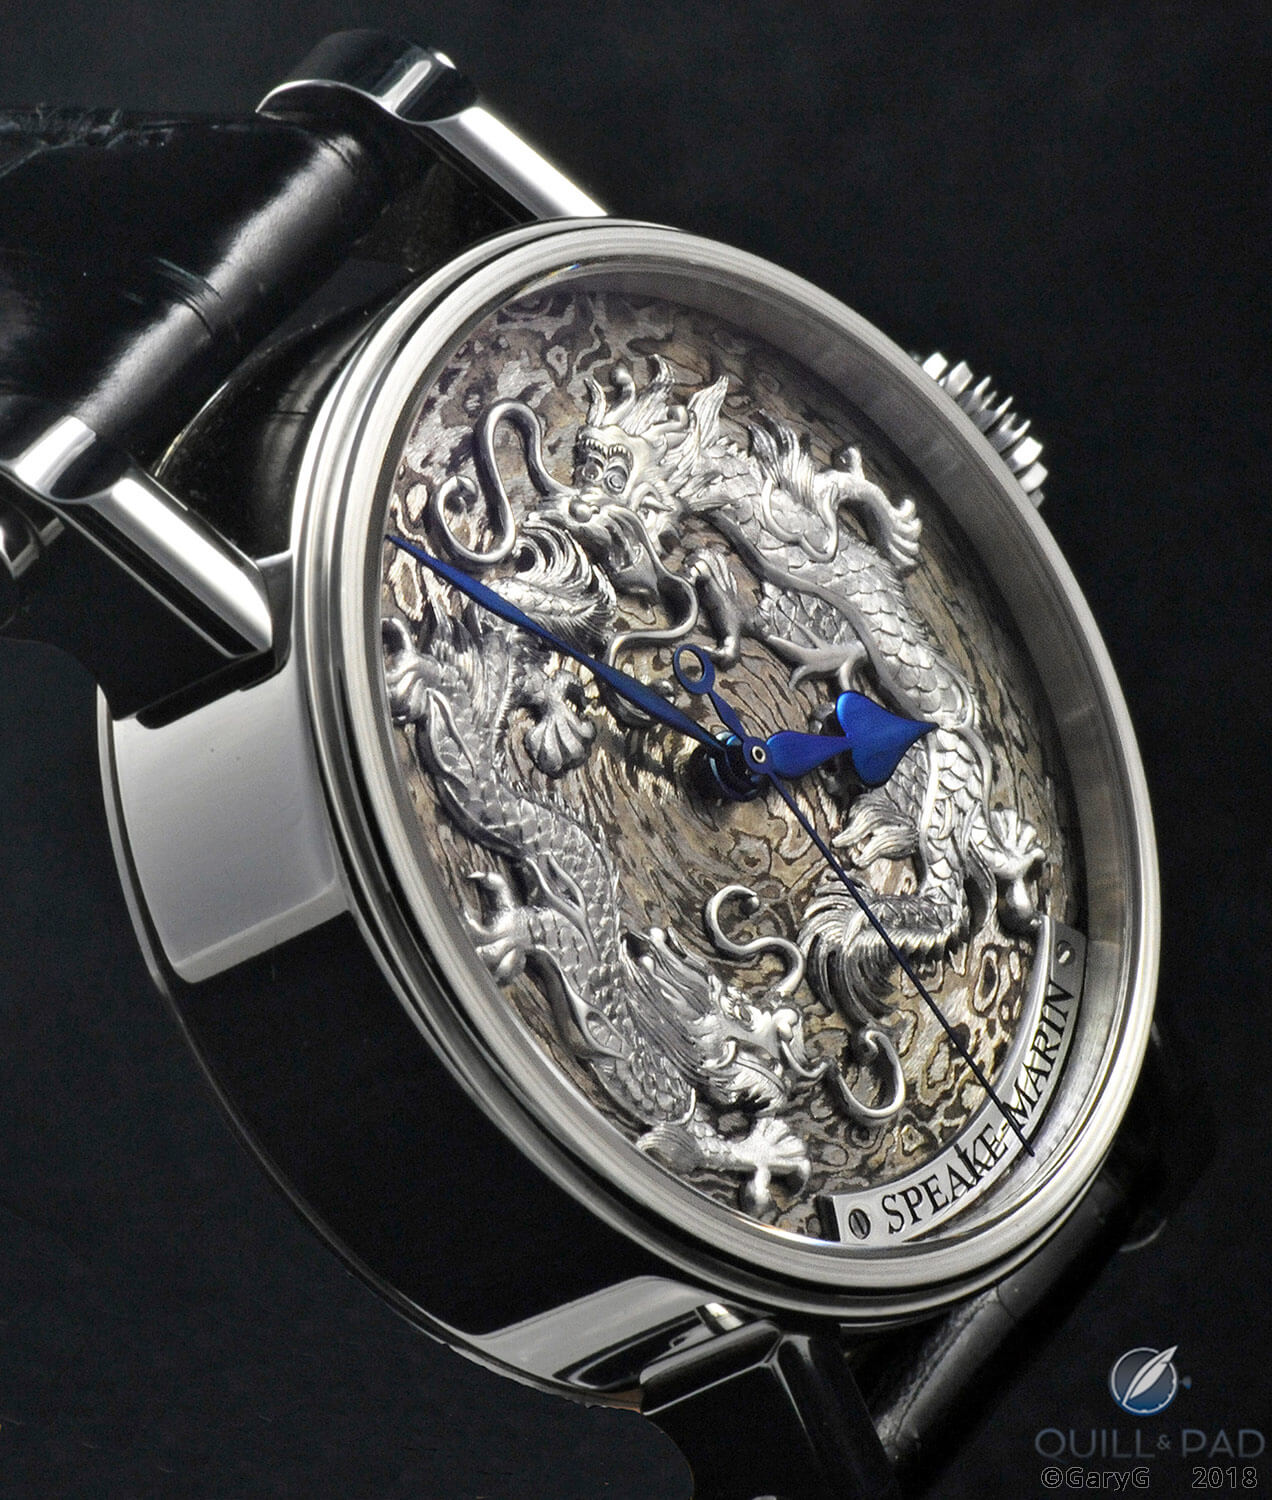 Fighting Time by Peter Speake-Marin and Kees Engelbarts